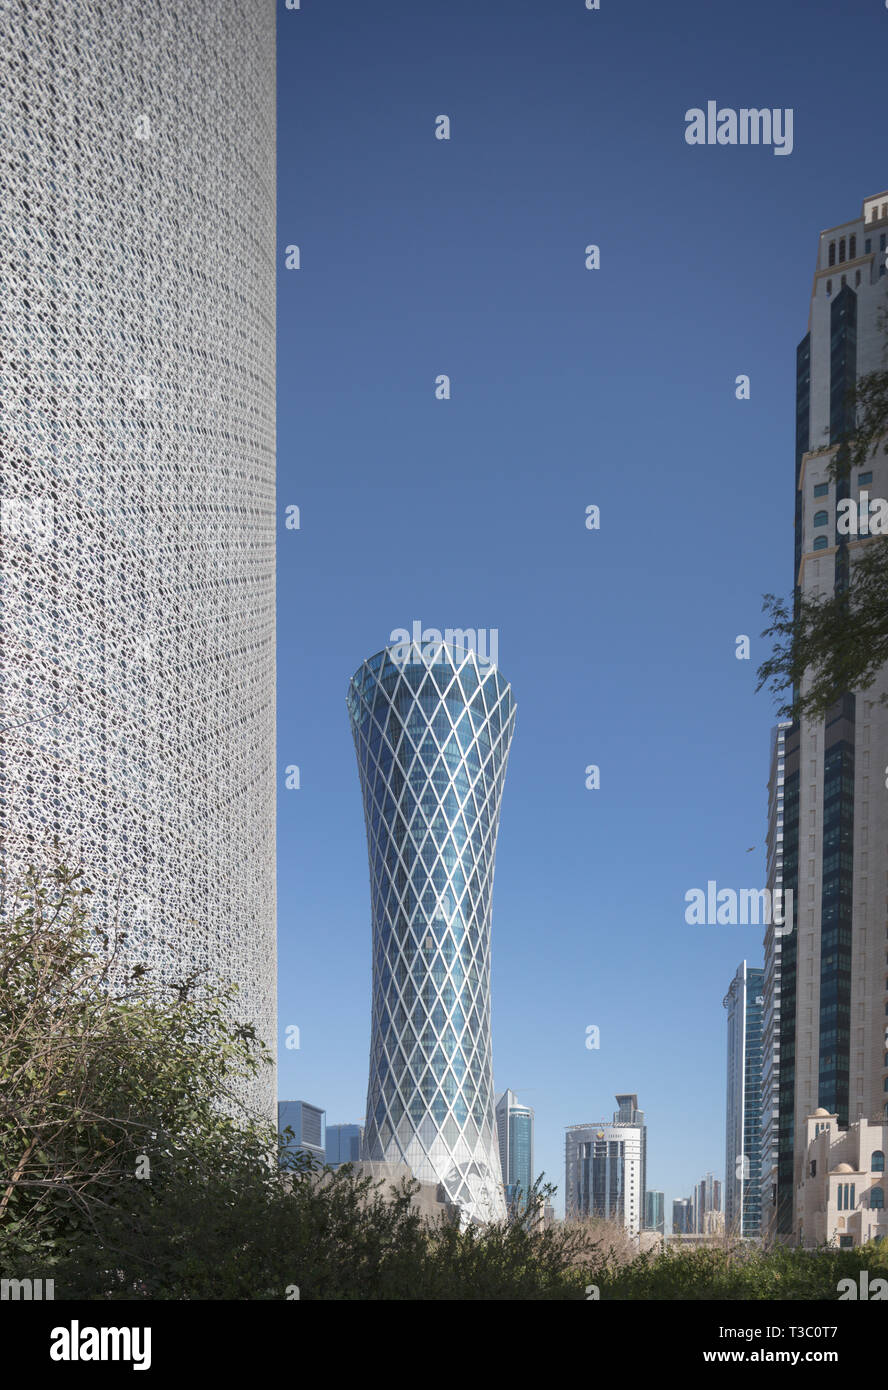 The Tornado Tower, also called the QIPCO Tower, a high-rise office skyscraper in the city of Doha, Qatar. Stock Photo